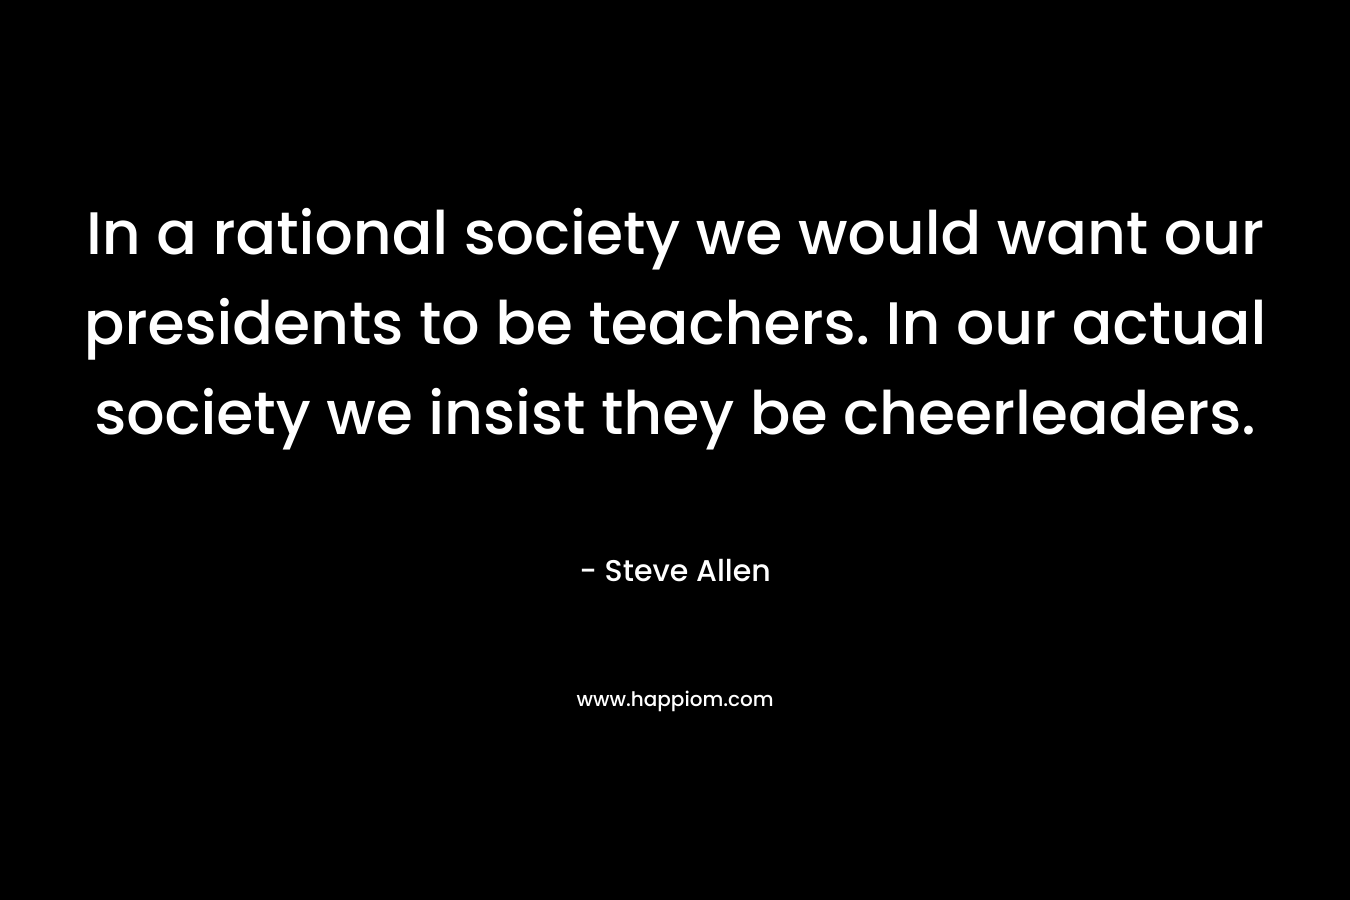 In a rational society we would want our presidents to be teachers. In our actual society we insist they be cheerleaders. – Steve Allen